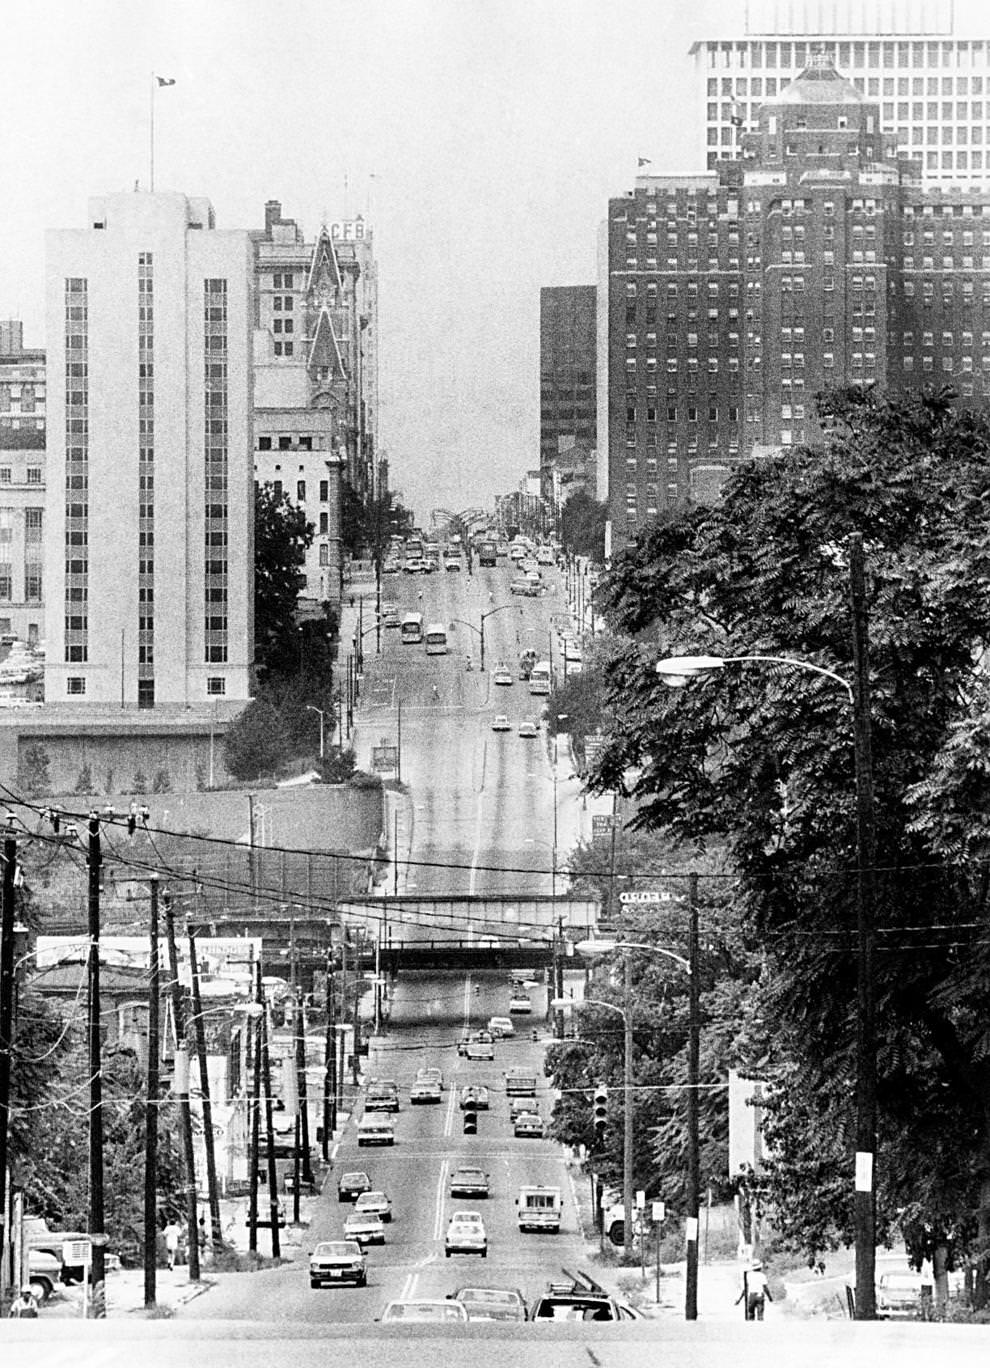 East Broad Street looking west into downtown Richmond from Church Hill, 1988